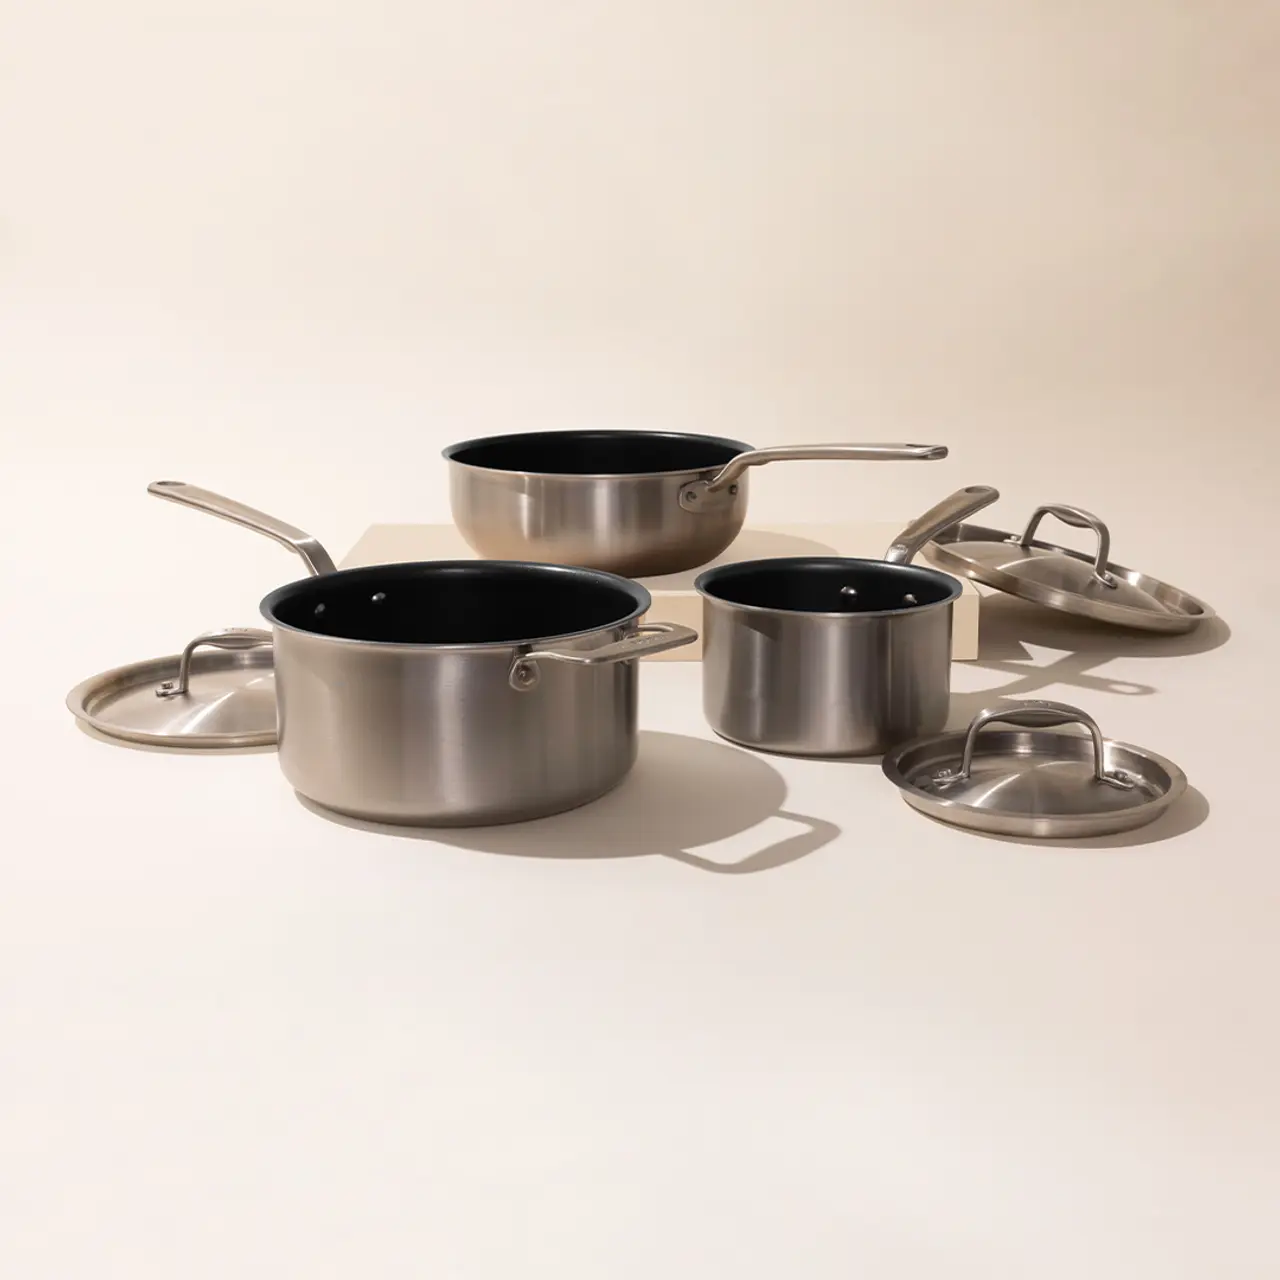 A set of three stainless steel pots with lids, featuring a large pot, a medium pot, and a small saucepan on a neutral background.